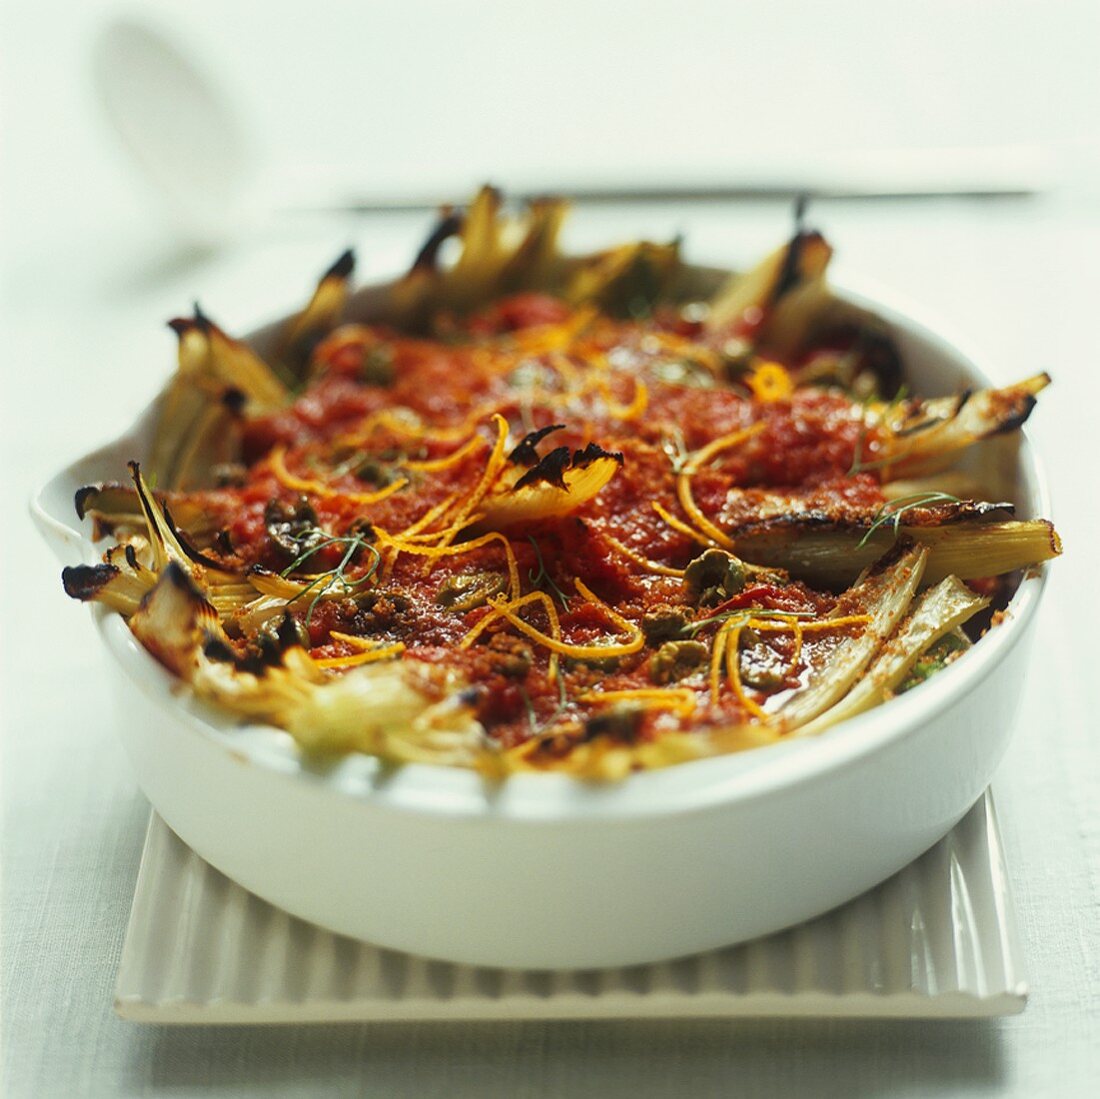 Fennel and tomato gratin with olives and orange zest